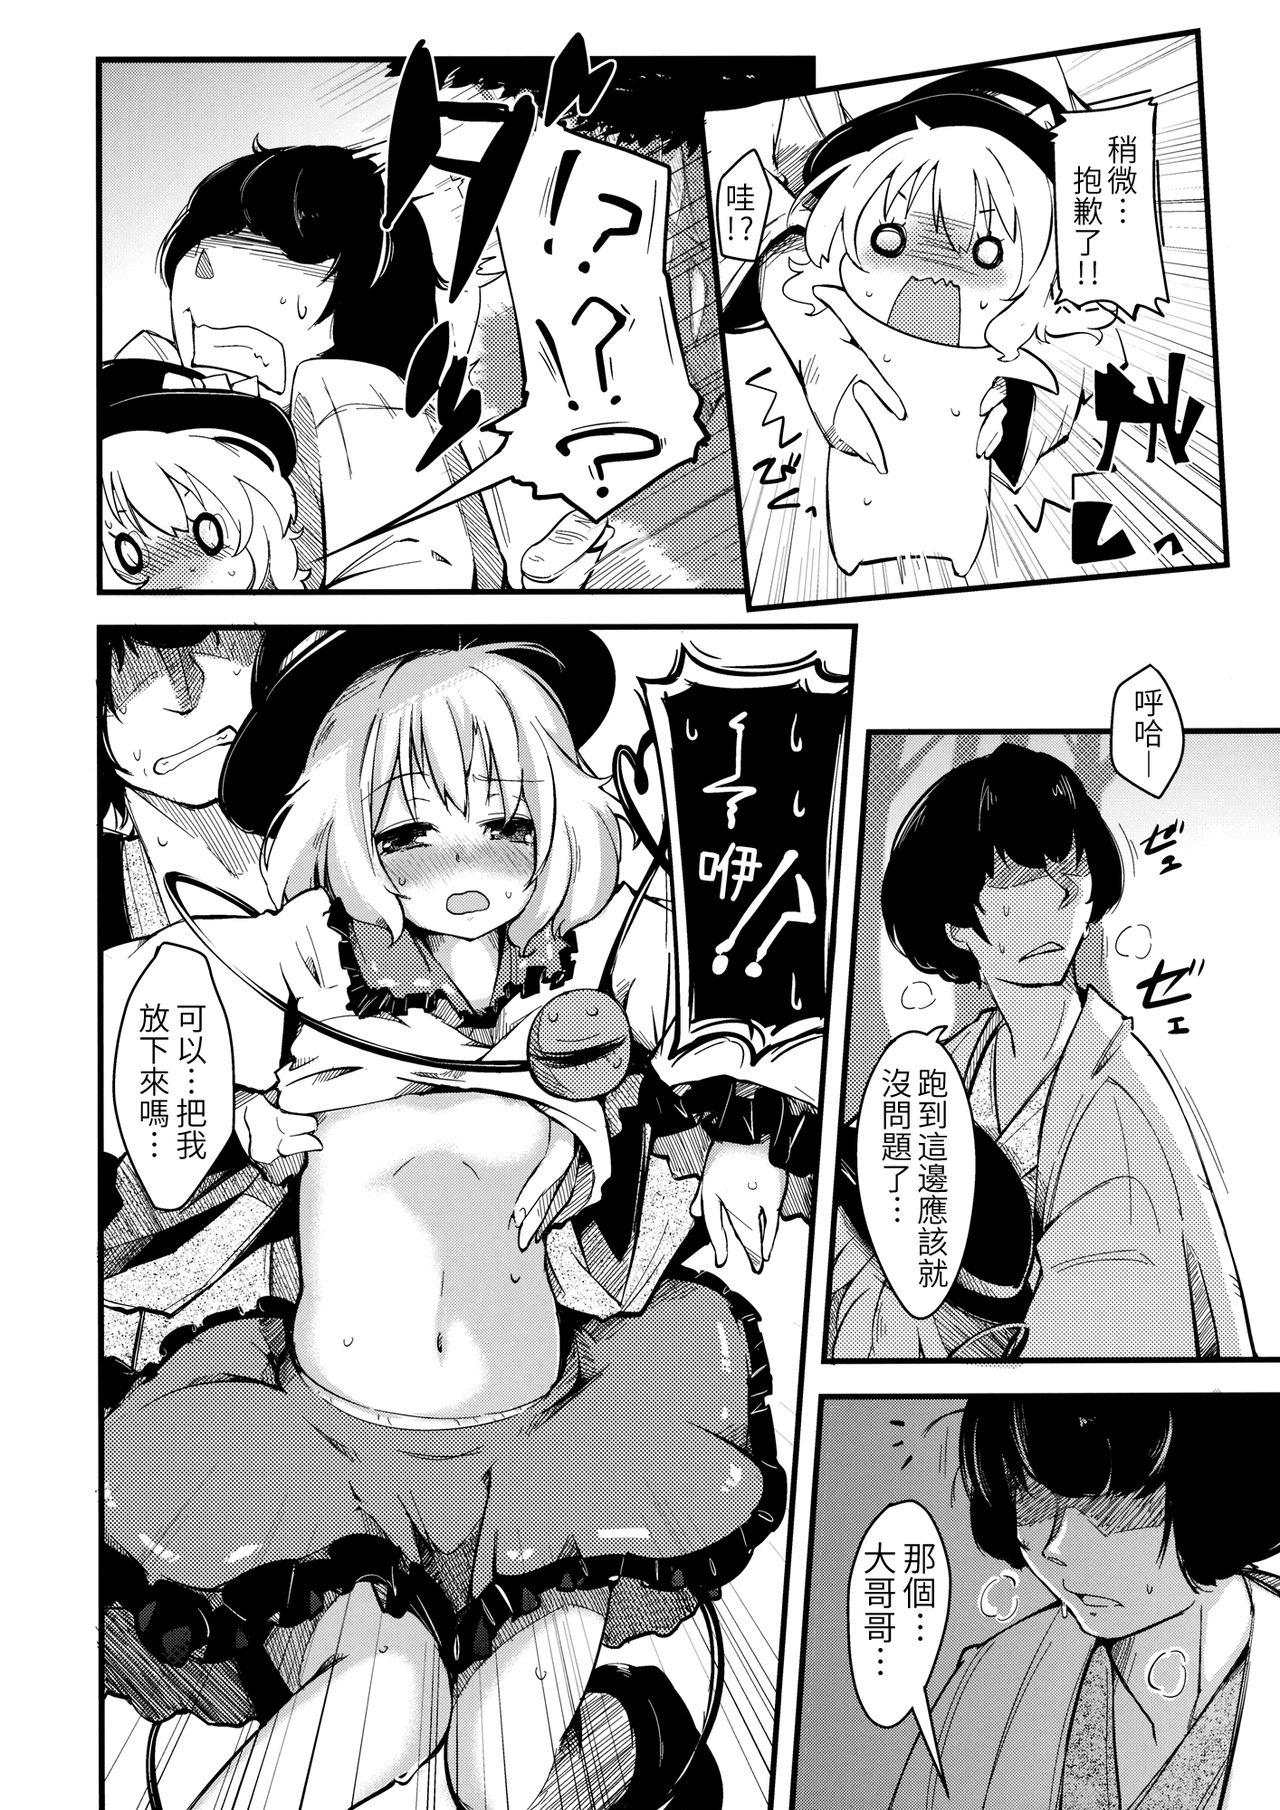 Negao subconscious girl - Touhou project Bro - Page 8